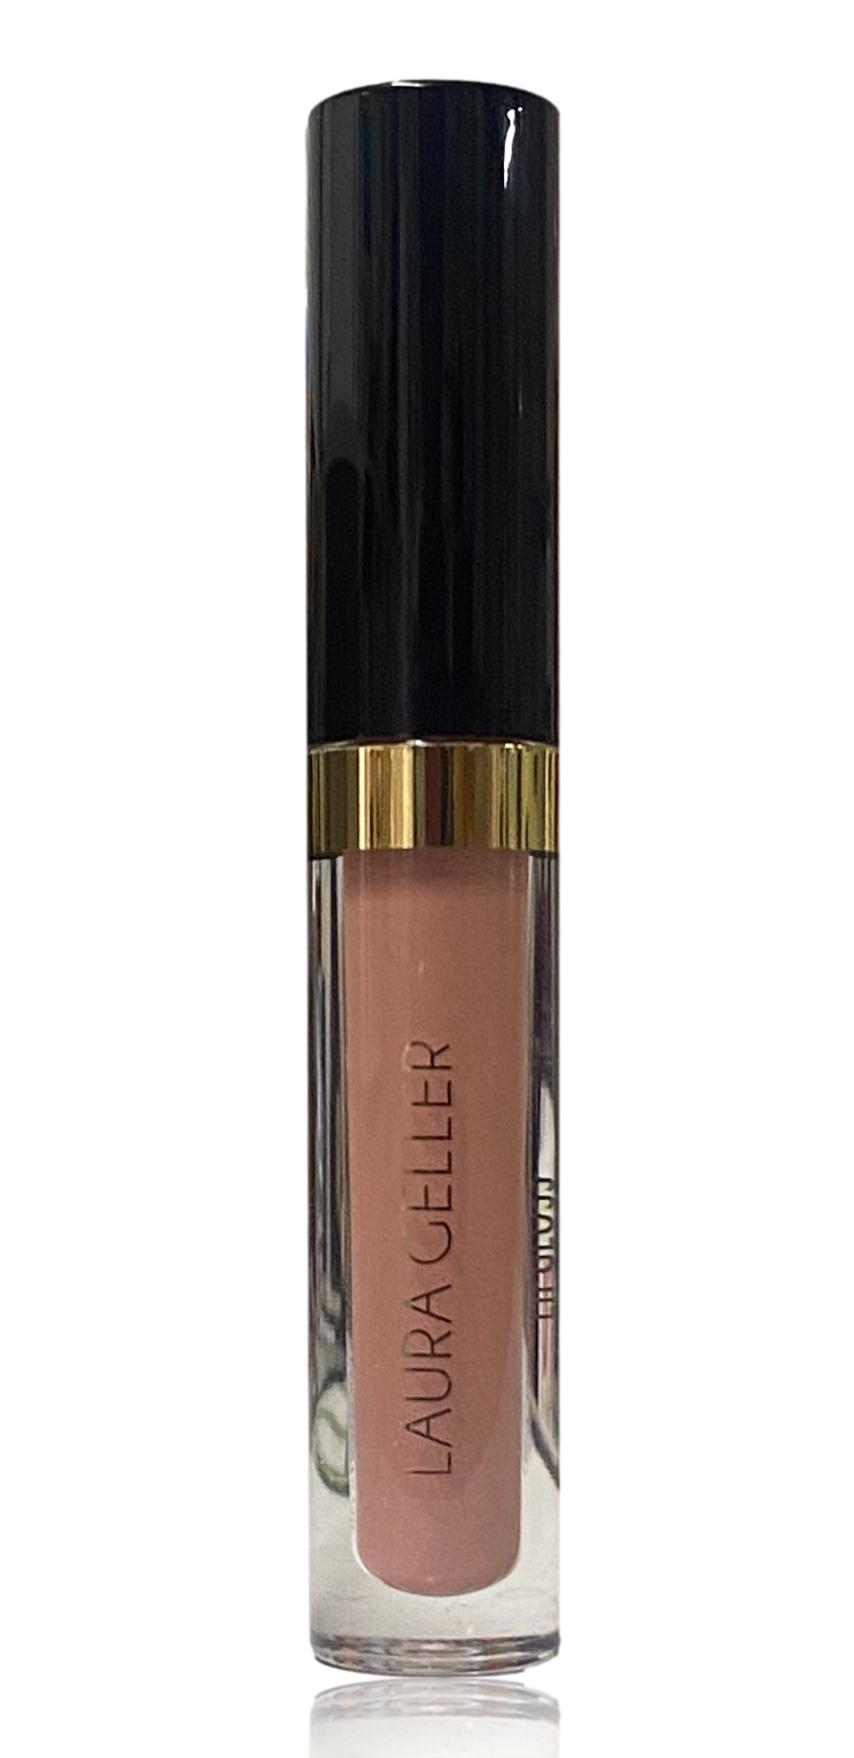 LAURA GELLER  Limited Edition Lip Gloss in Perfect peach Shimmer (2.0ml)